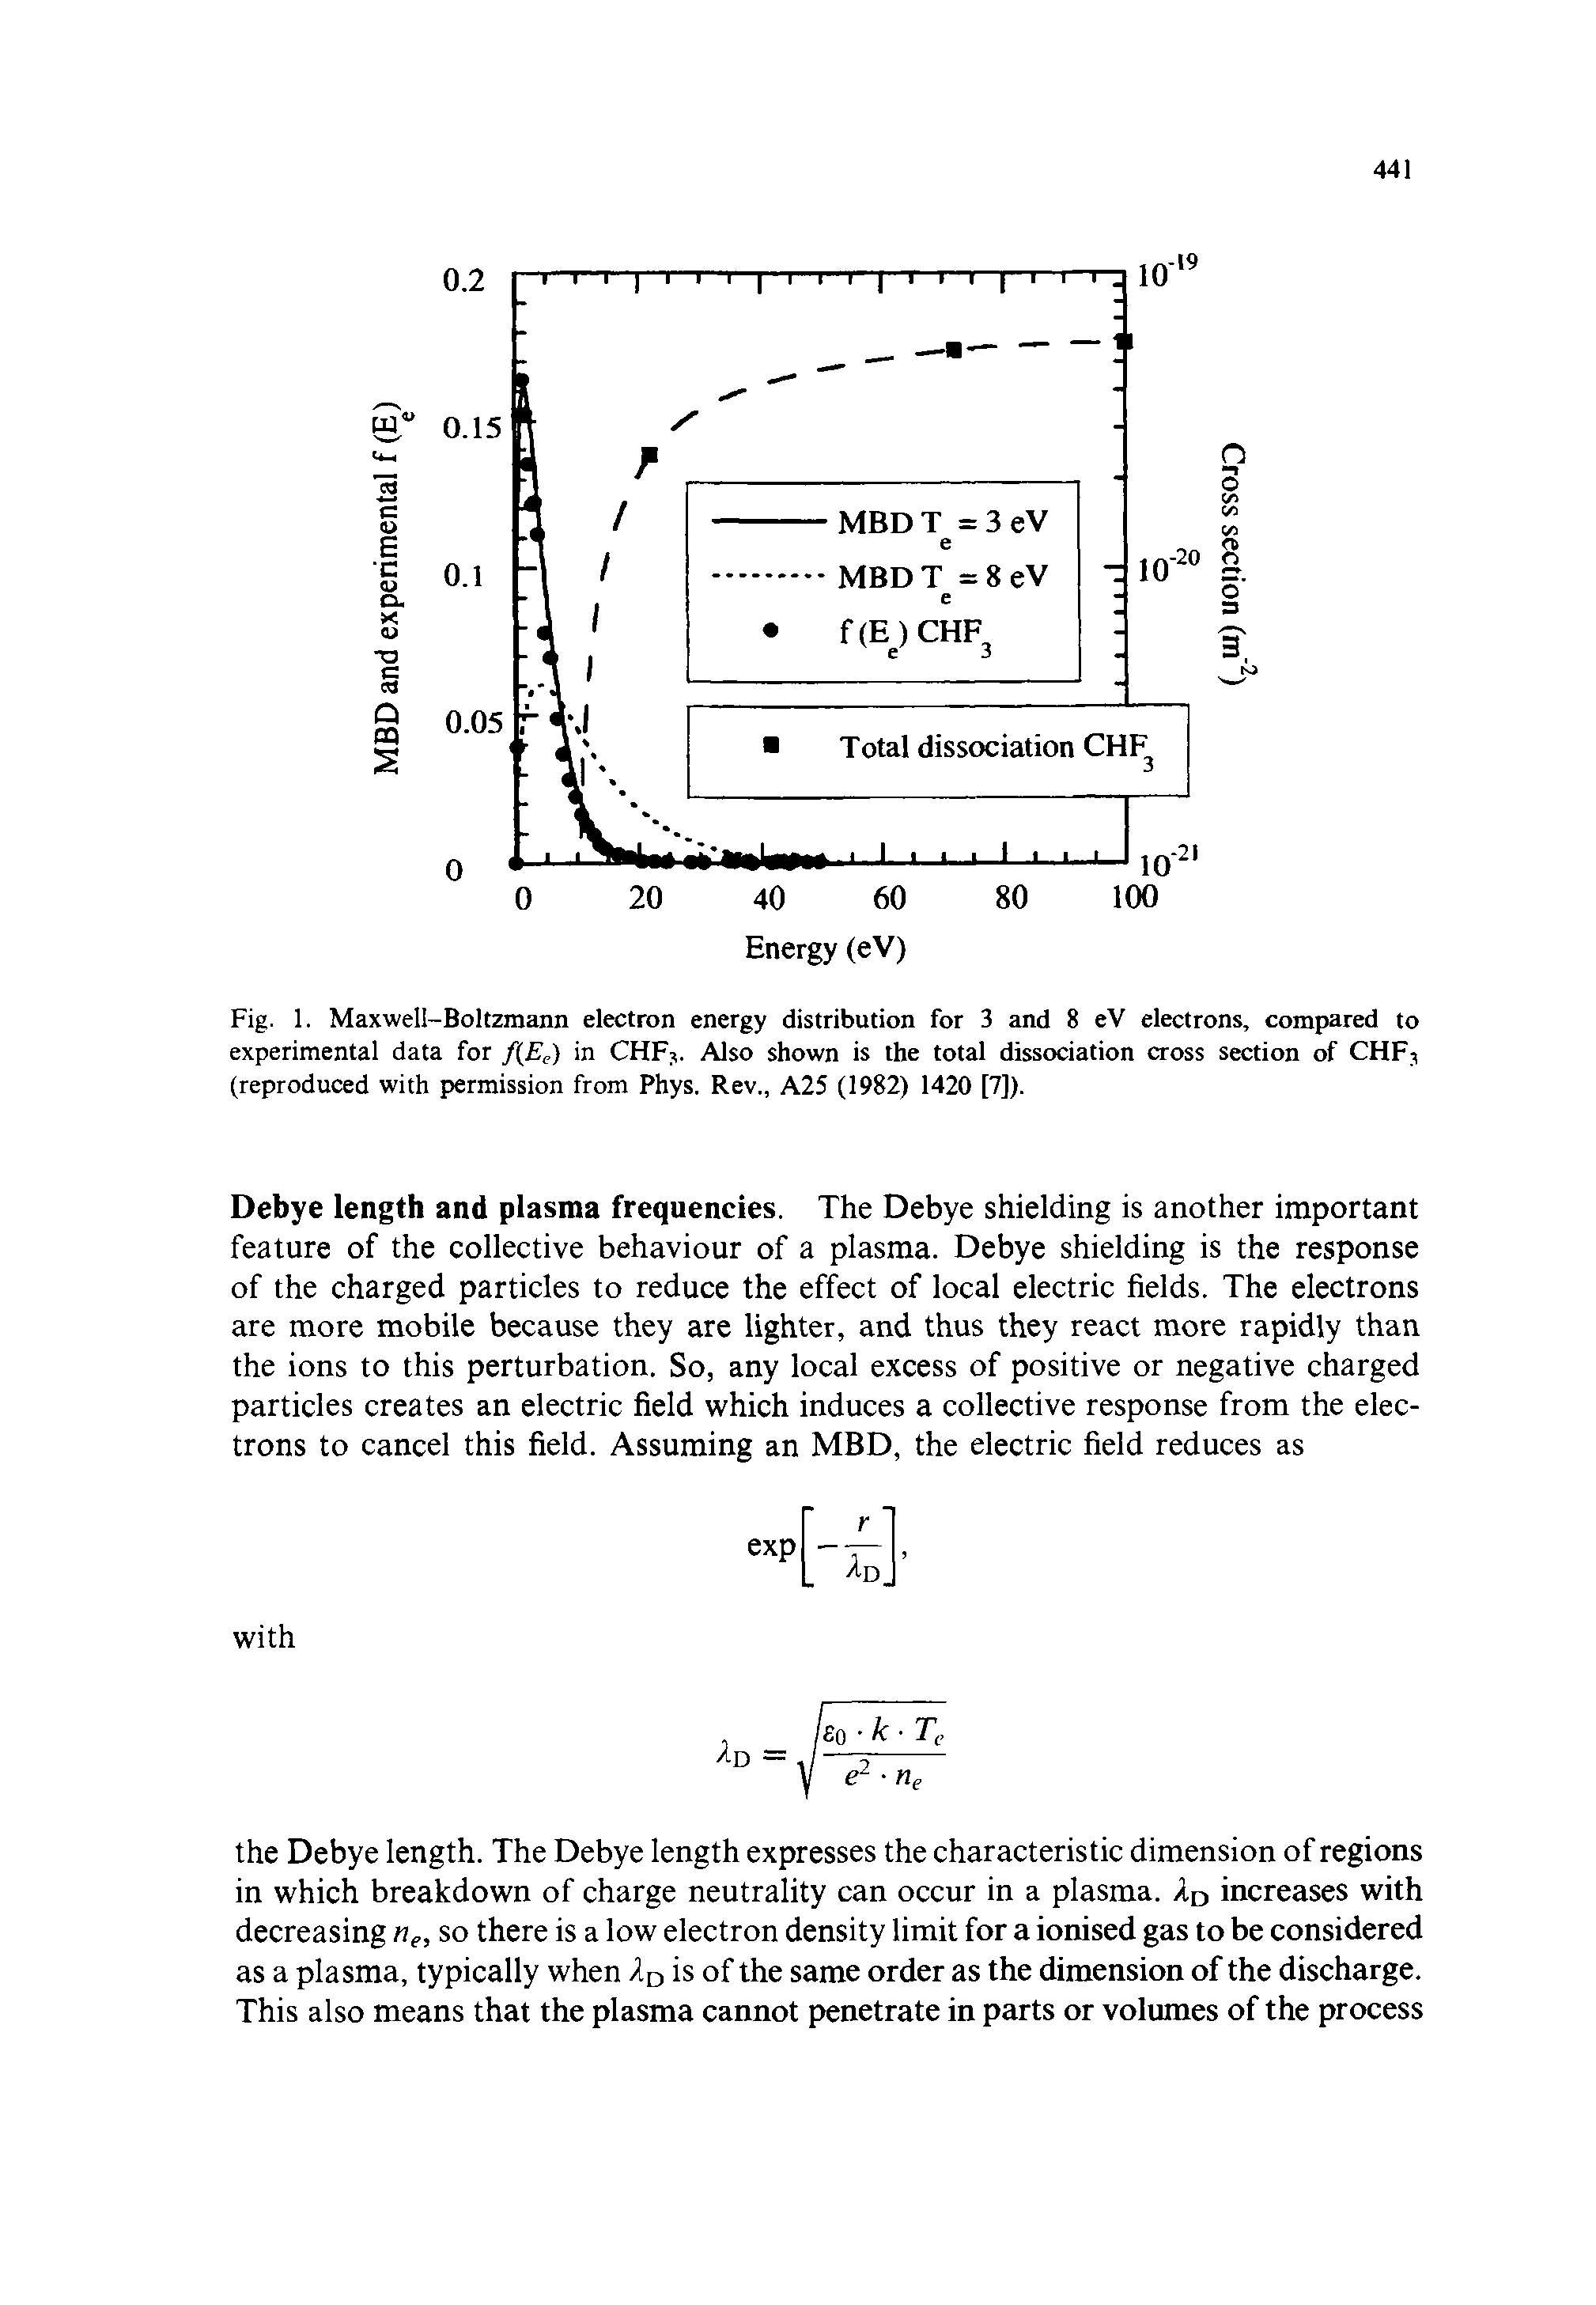 Fig. 1. Maxwell-Boltzmann electron energy distribution for 3 and 8 eV electrons, compared to experimental data for f(Ec) in CHF . Also shown is the total dissociation cross section of CHFj (reproduced with permission from Phys. Rev., A25 (1982) 1420 [7]).